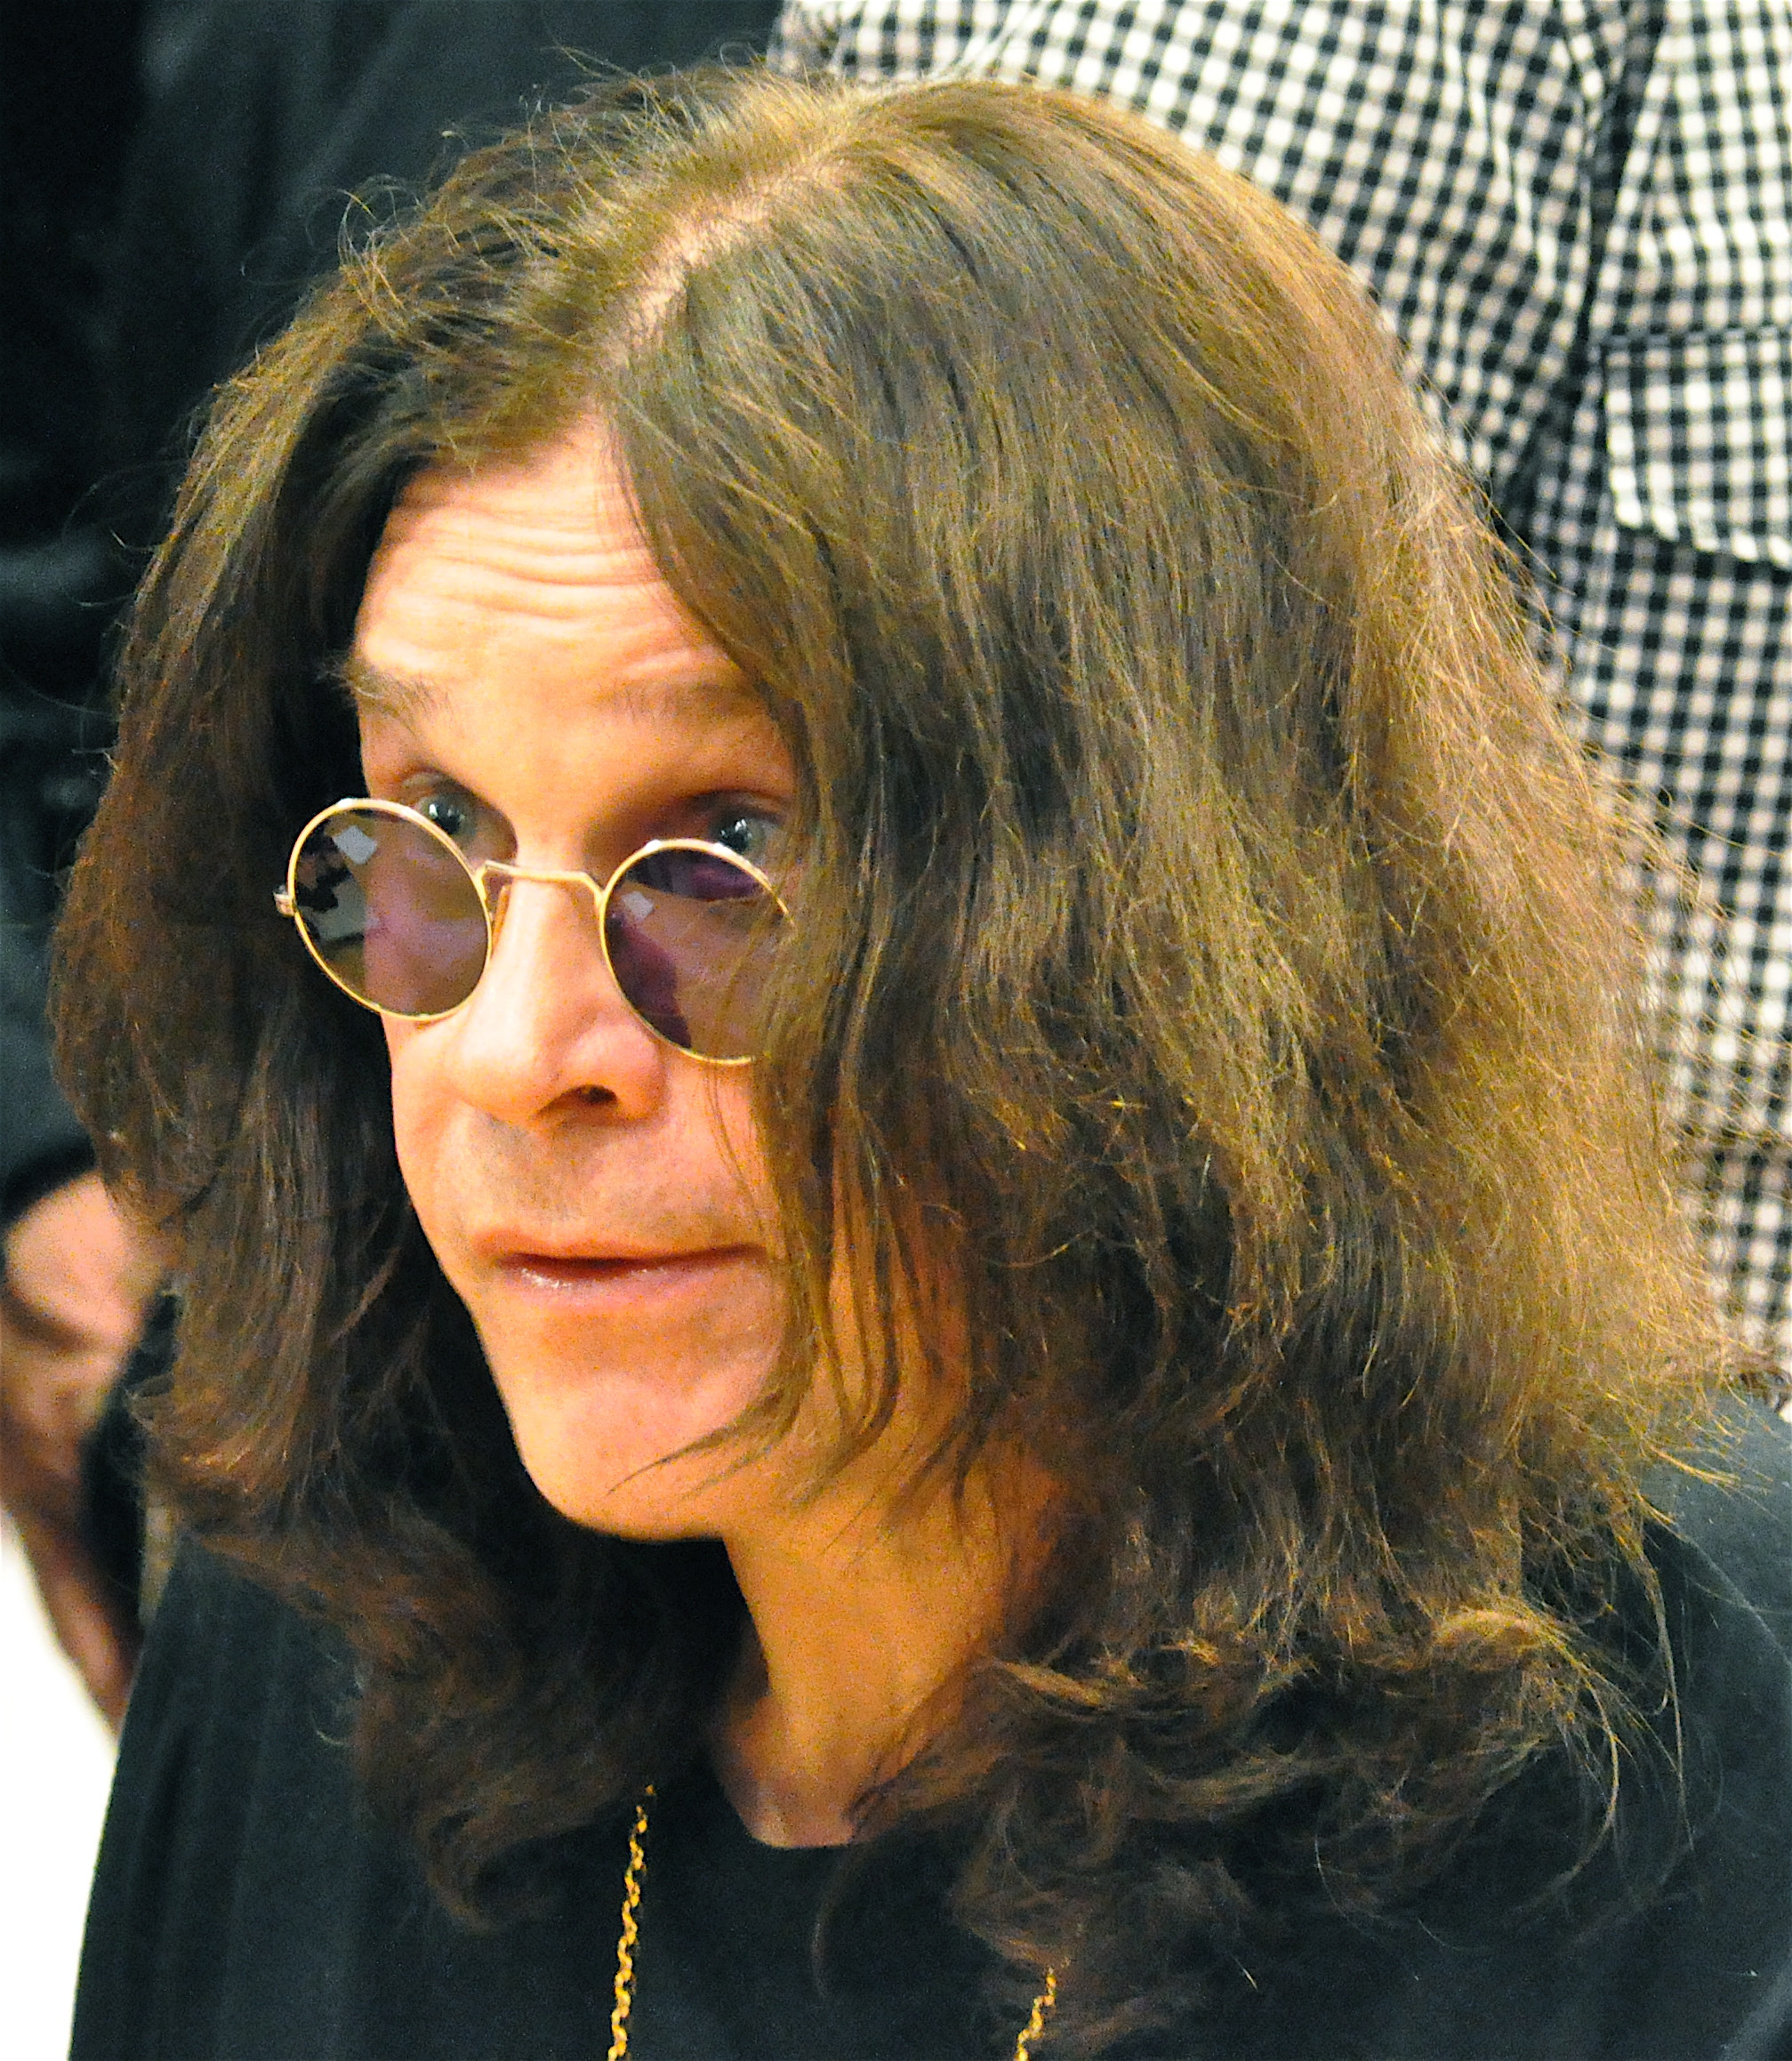 Ozzy Osbourne Cancels All Shows; Releases Statement Saying Touring Days Are Over